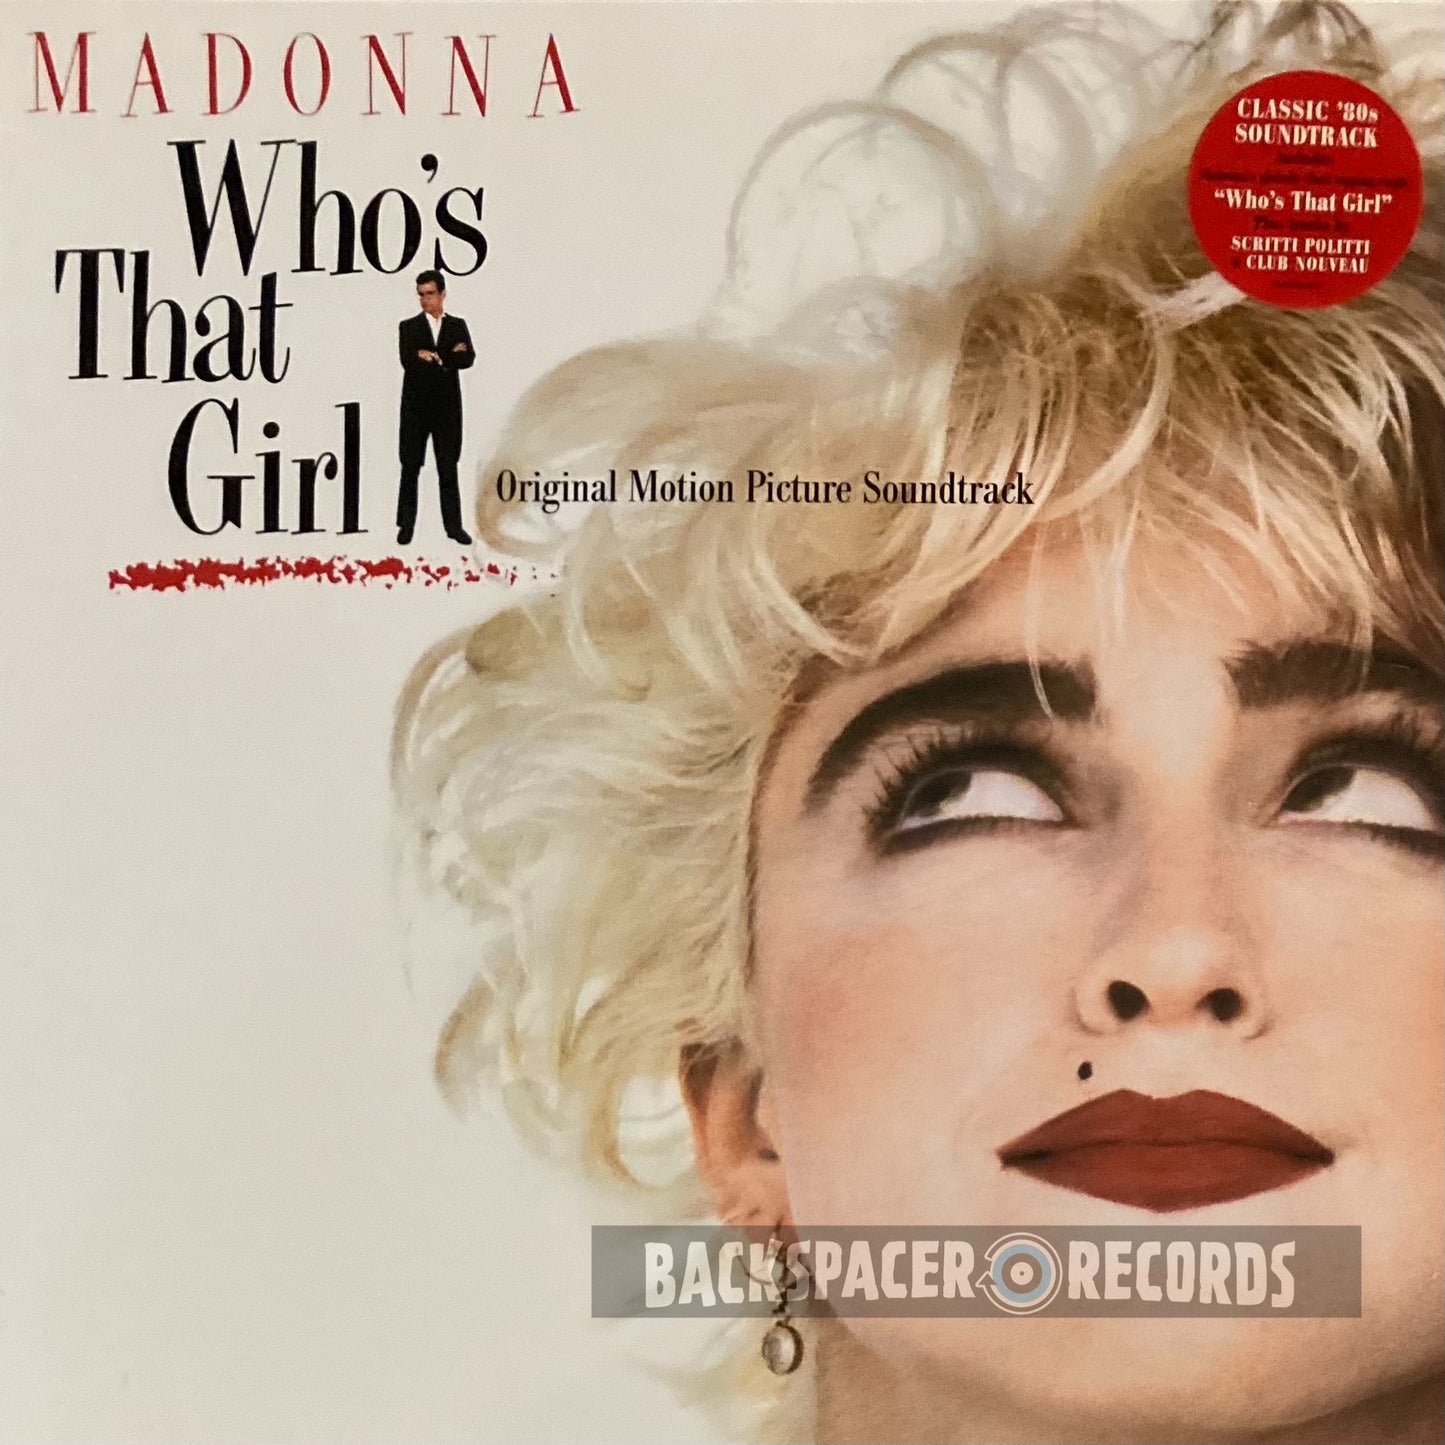 Madonna - Who’s That Girl Original Motion Picture Soundtrack